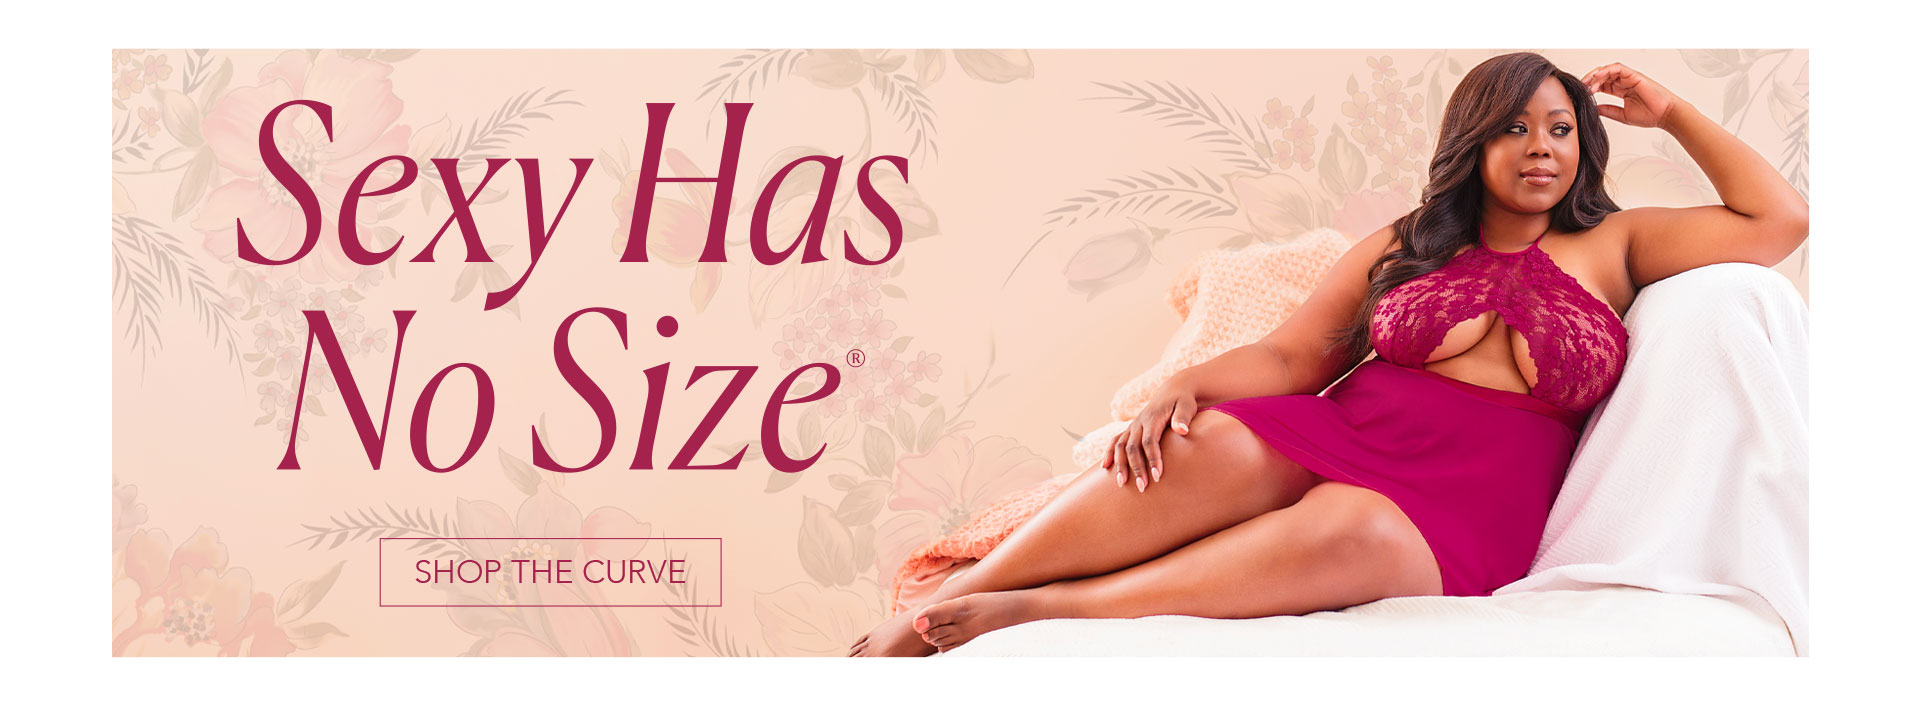 Sexy Has No Size - Shop the Curve